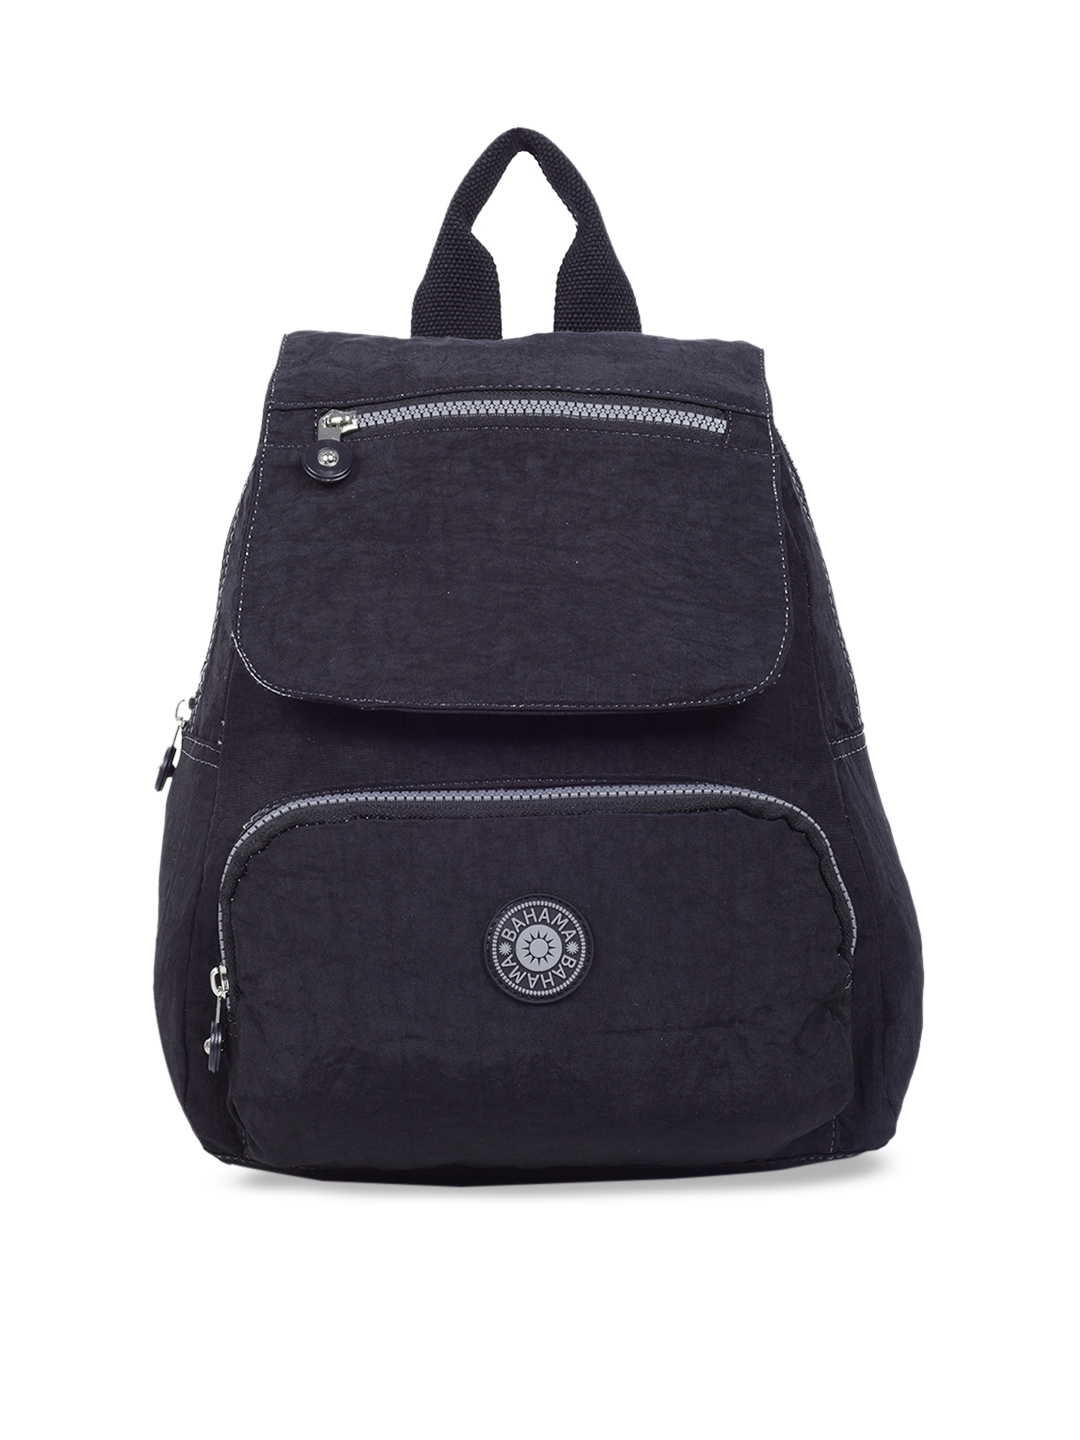 BAHAMA Crinkle Unisex Black Solid Backpack Price in India